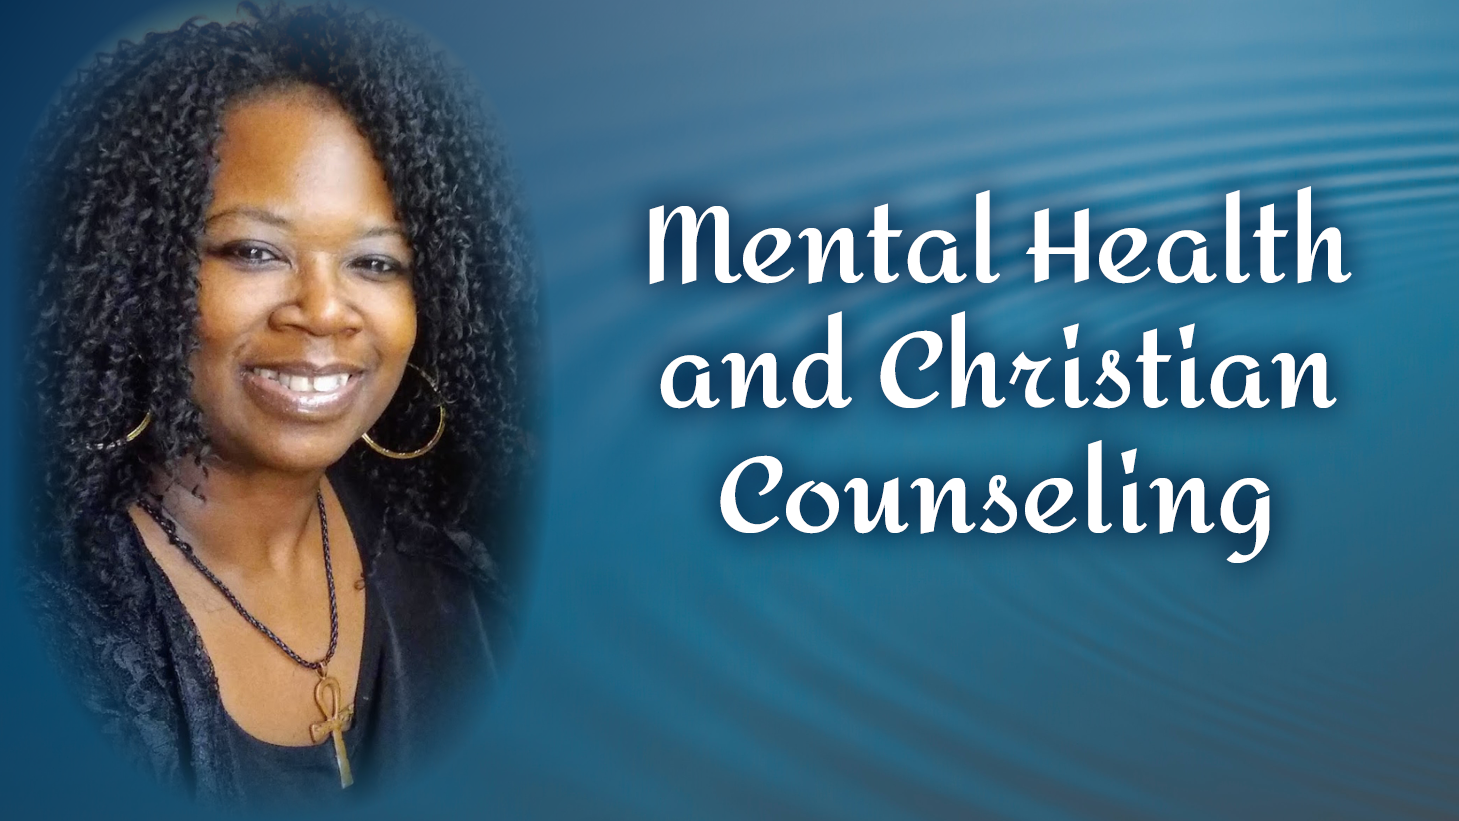 Mental Health and Christian Counseling